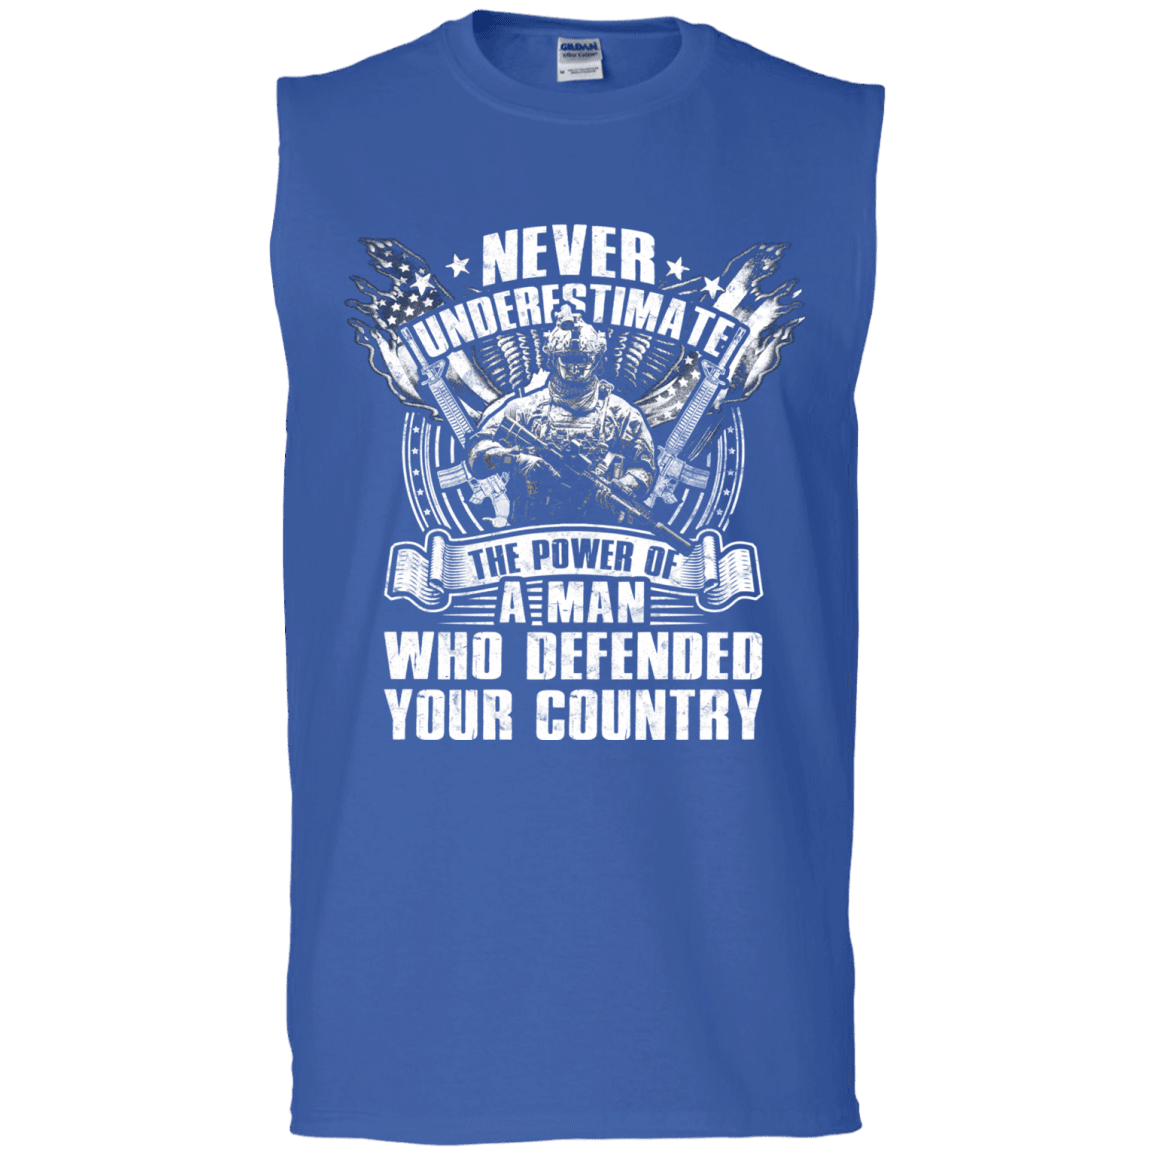 Military T-Shirt "Never Underestimate The Power of Man Defended Country Men" Front-TShirt-General-Veterans Nation